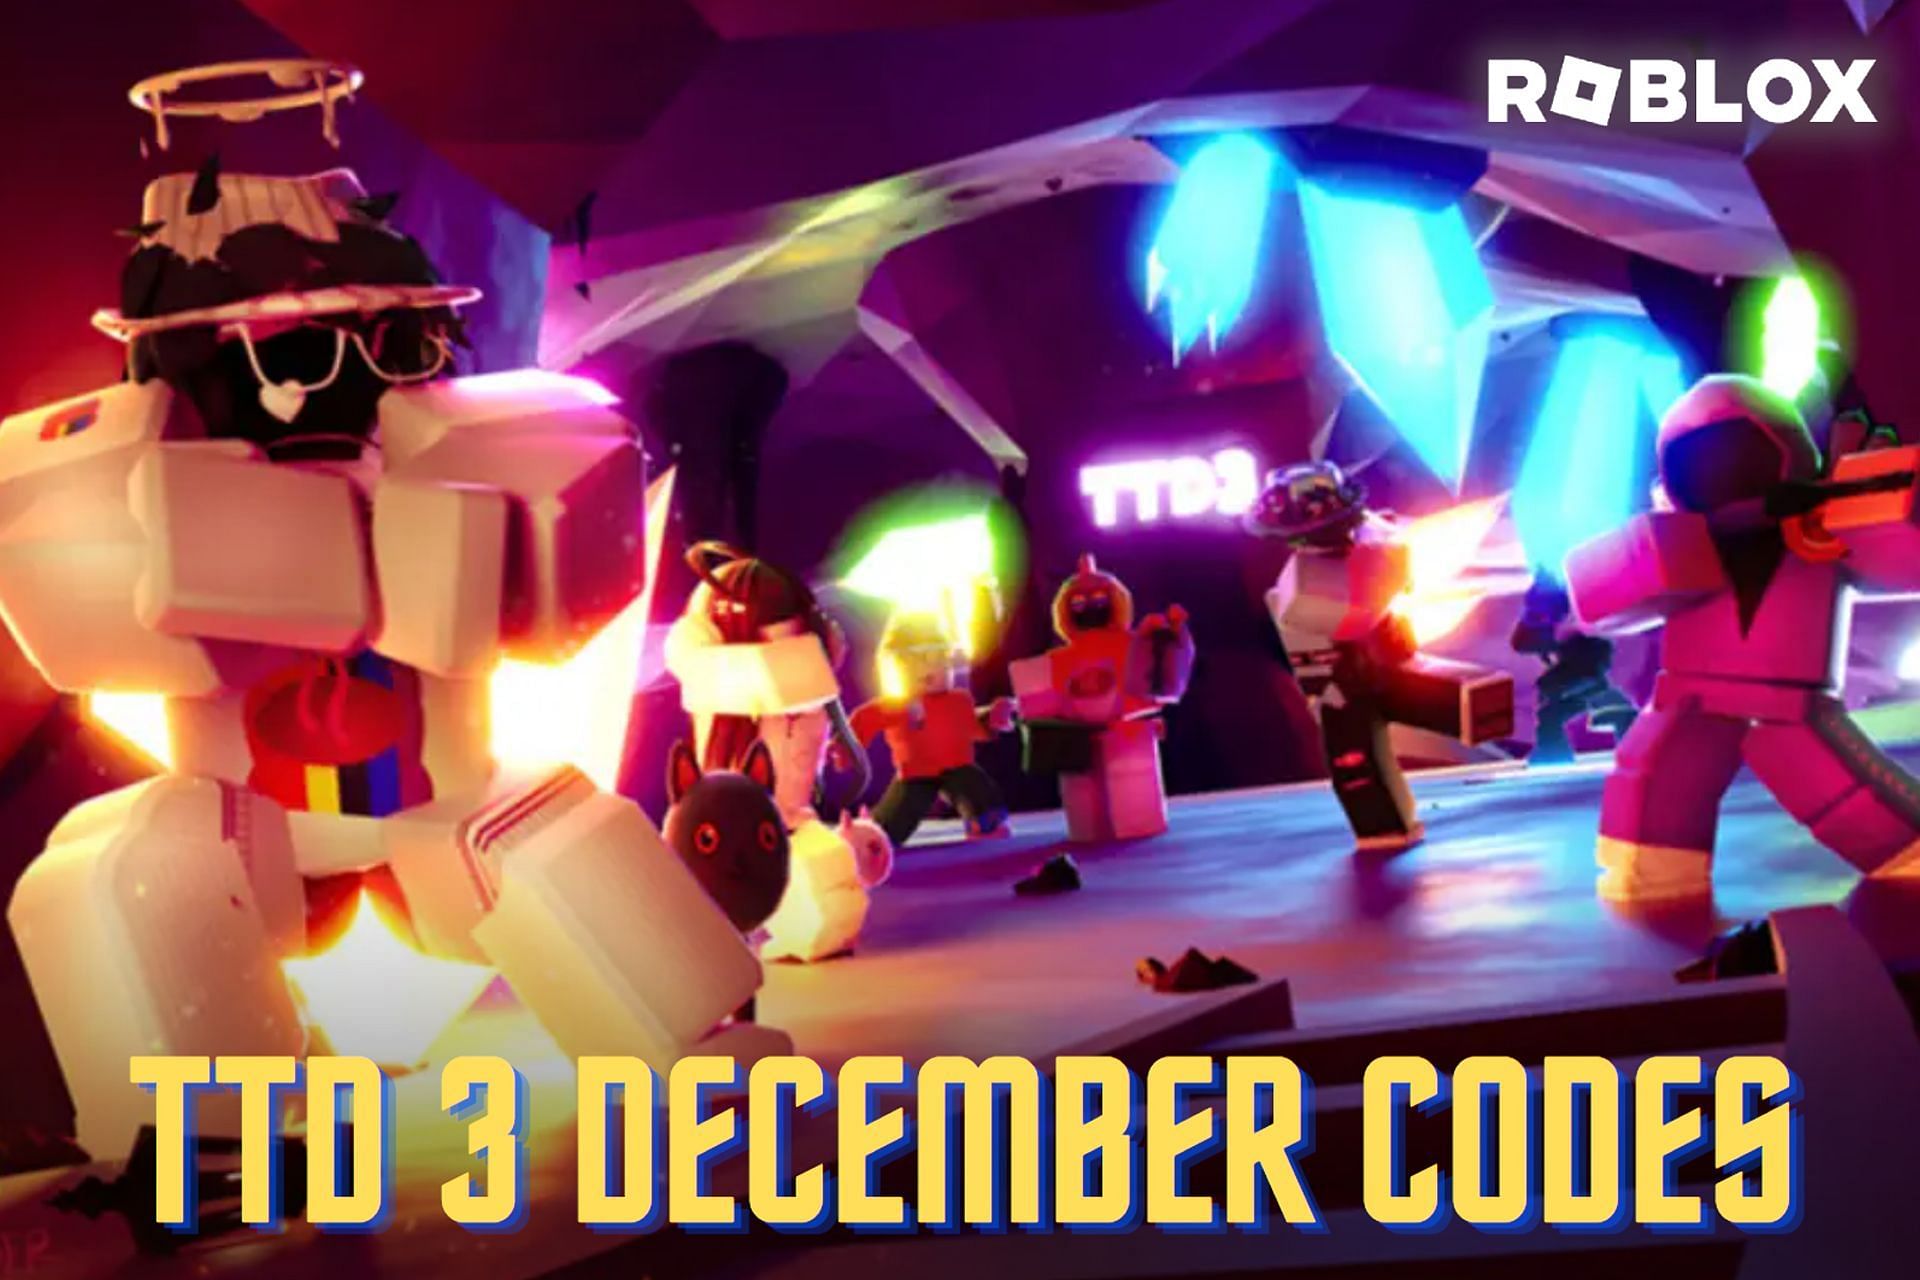 Dance, socialize and have fun (Image via Roblox)